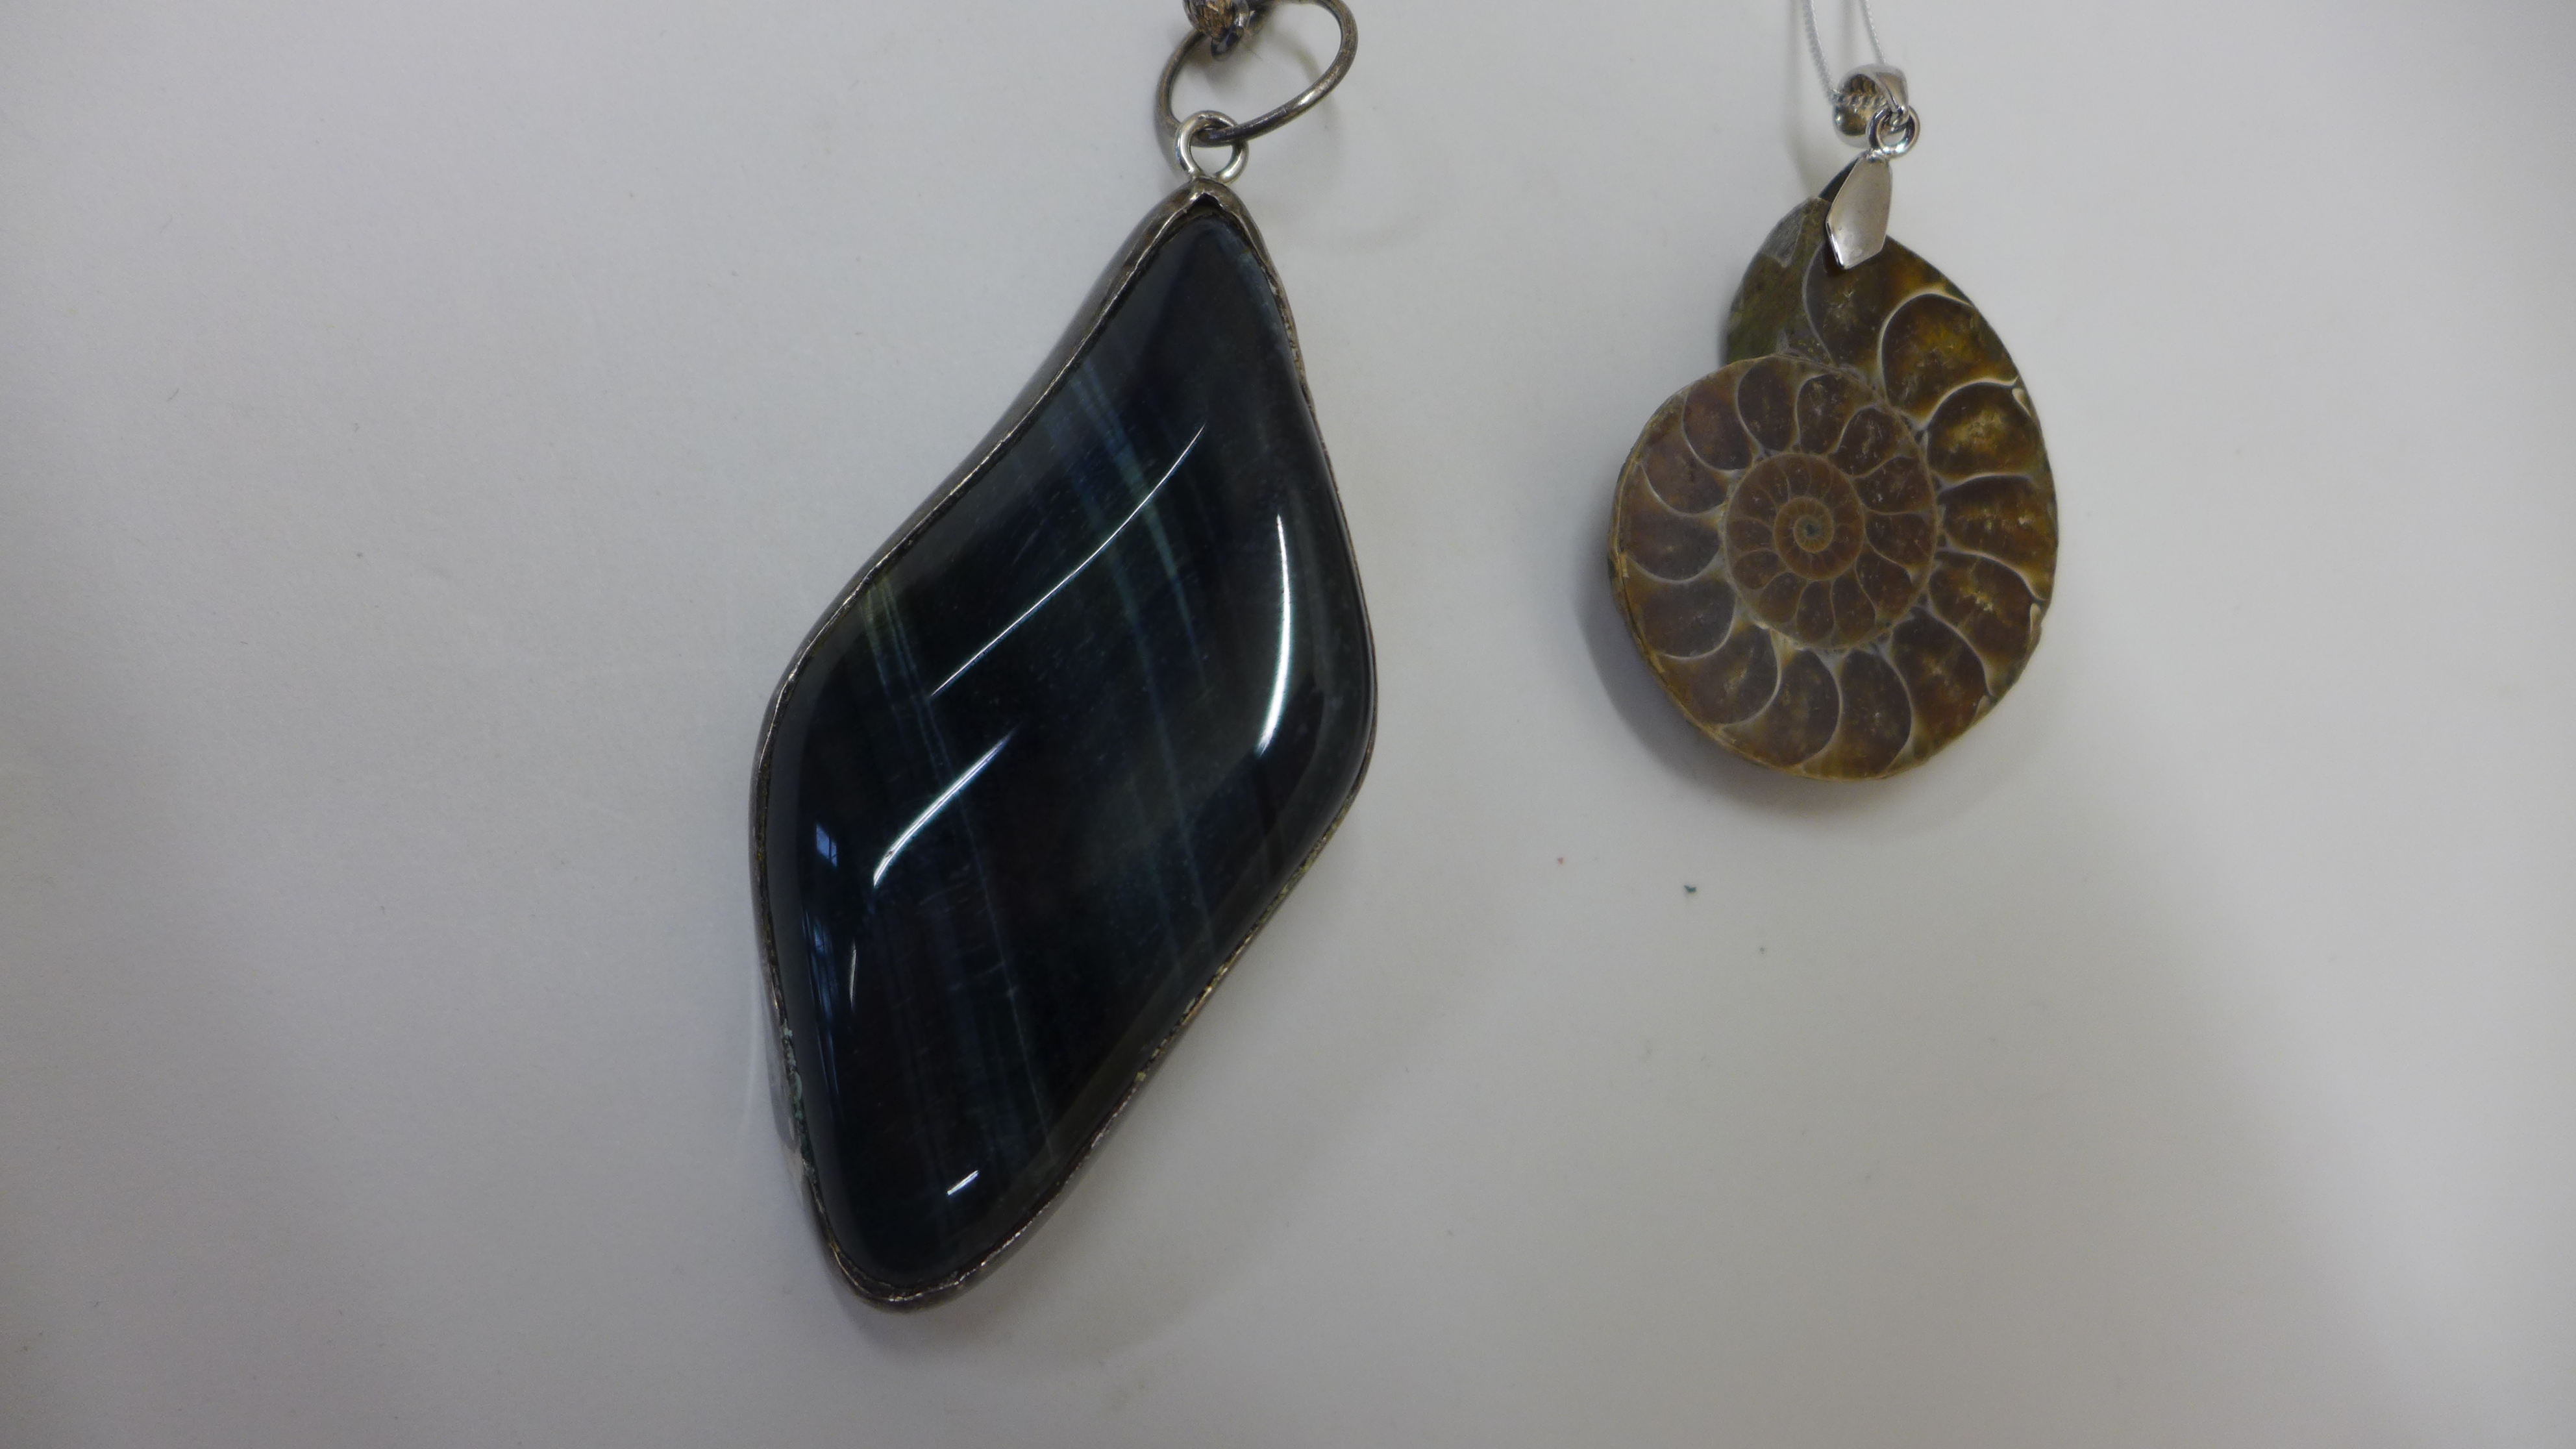 An amonite pendant on silver chain and a silver mounted labrodite pendant on silver chain - Image 2 of 3